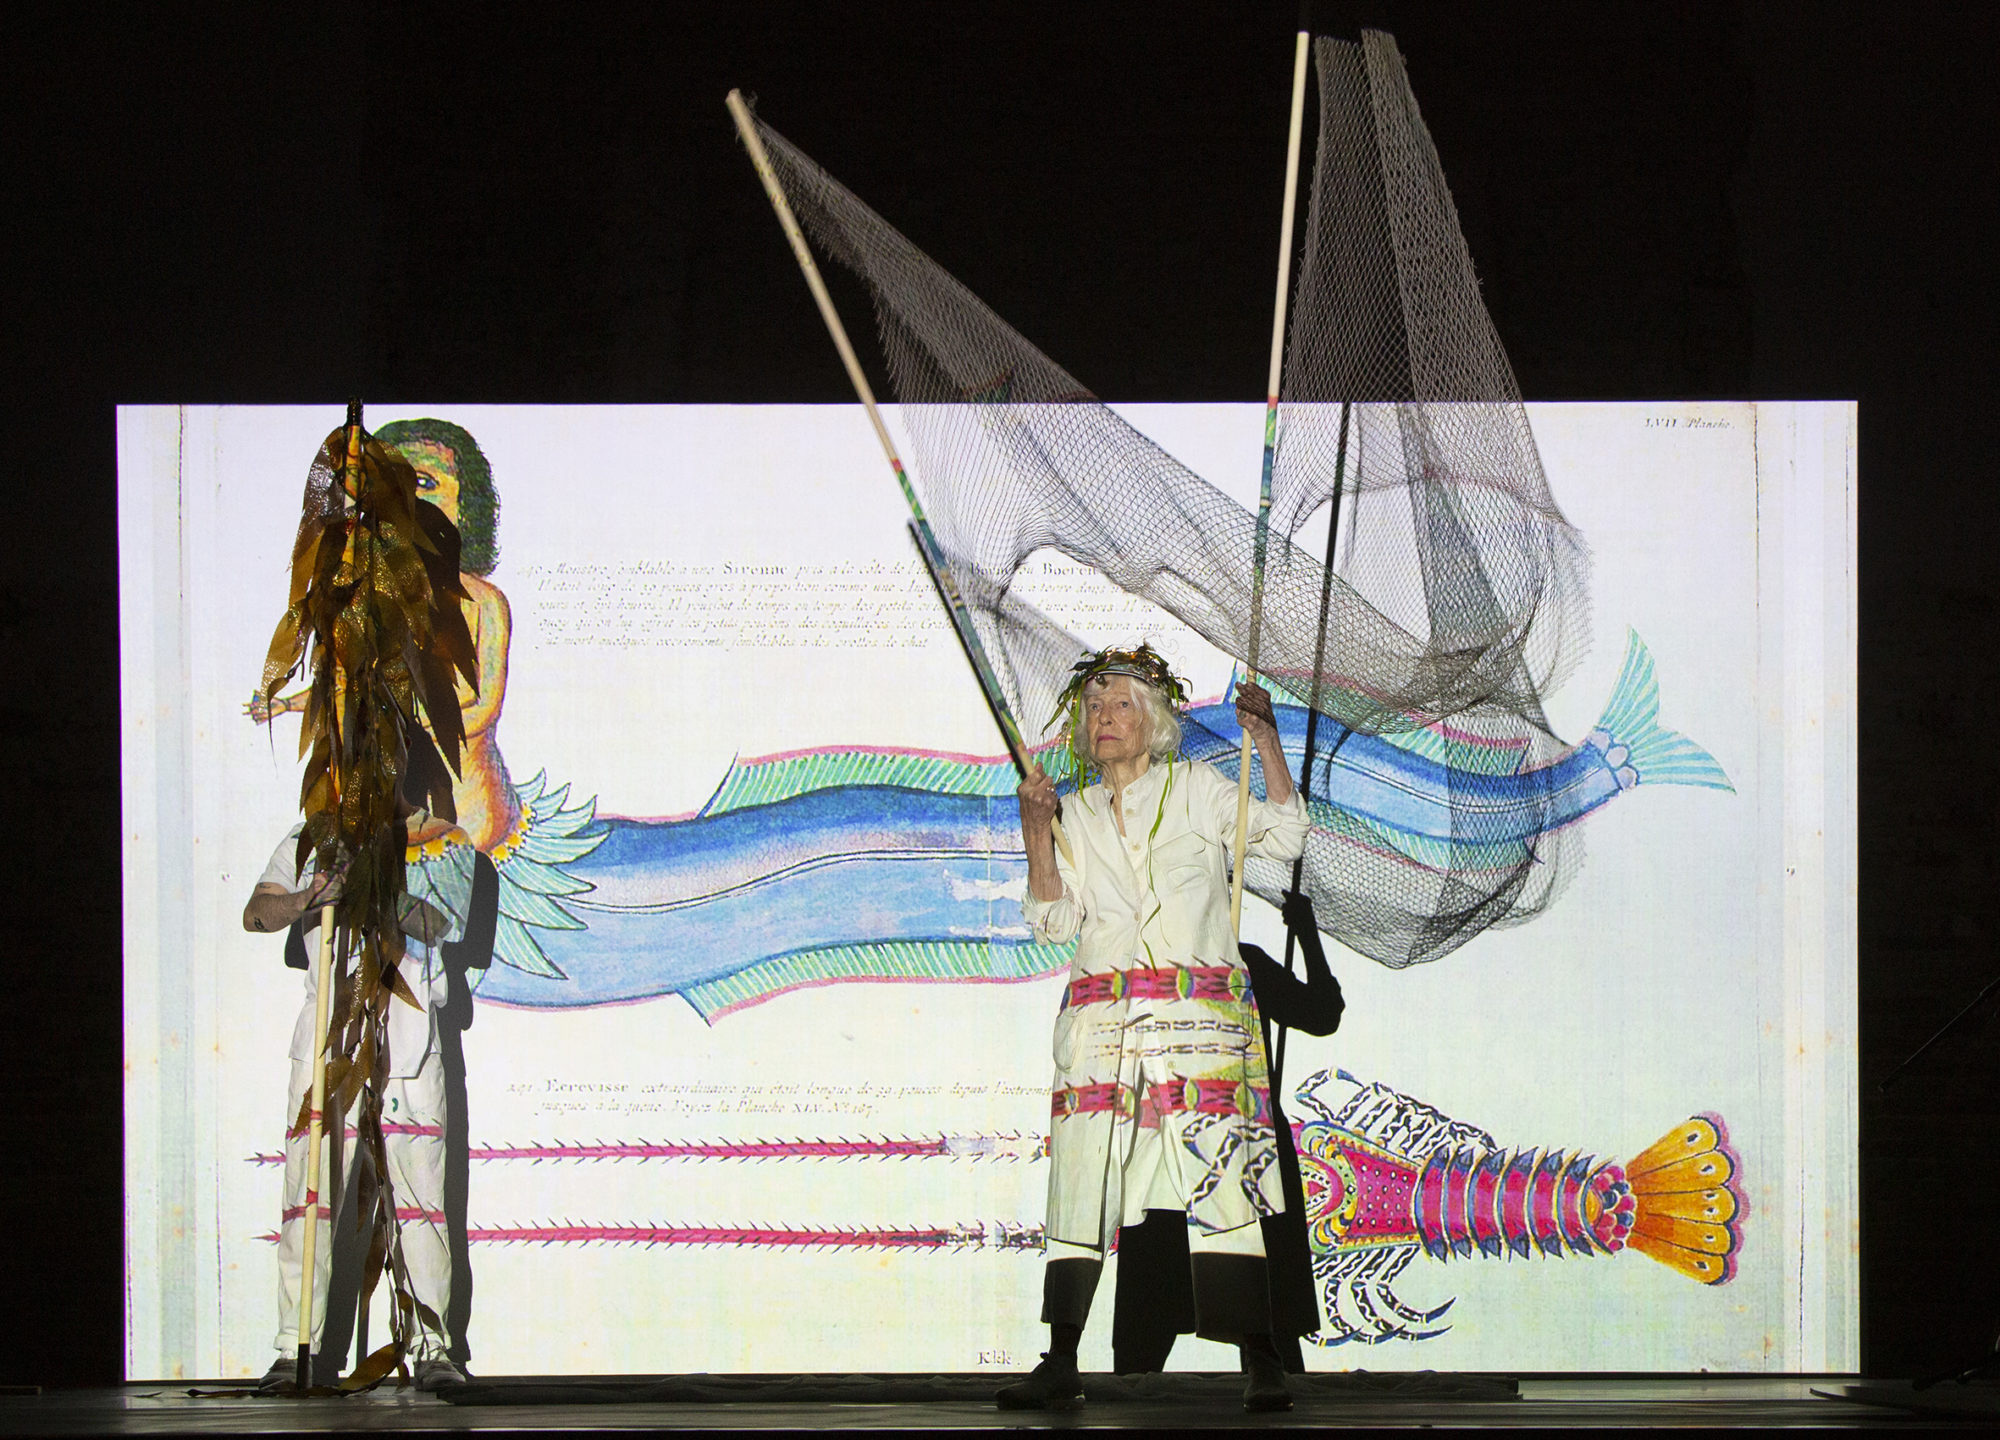 Joan Jonas performing with nets and projections in front of a white screen.